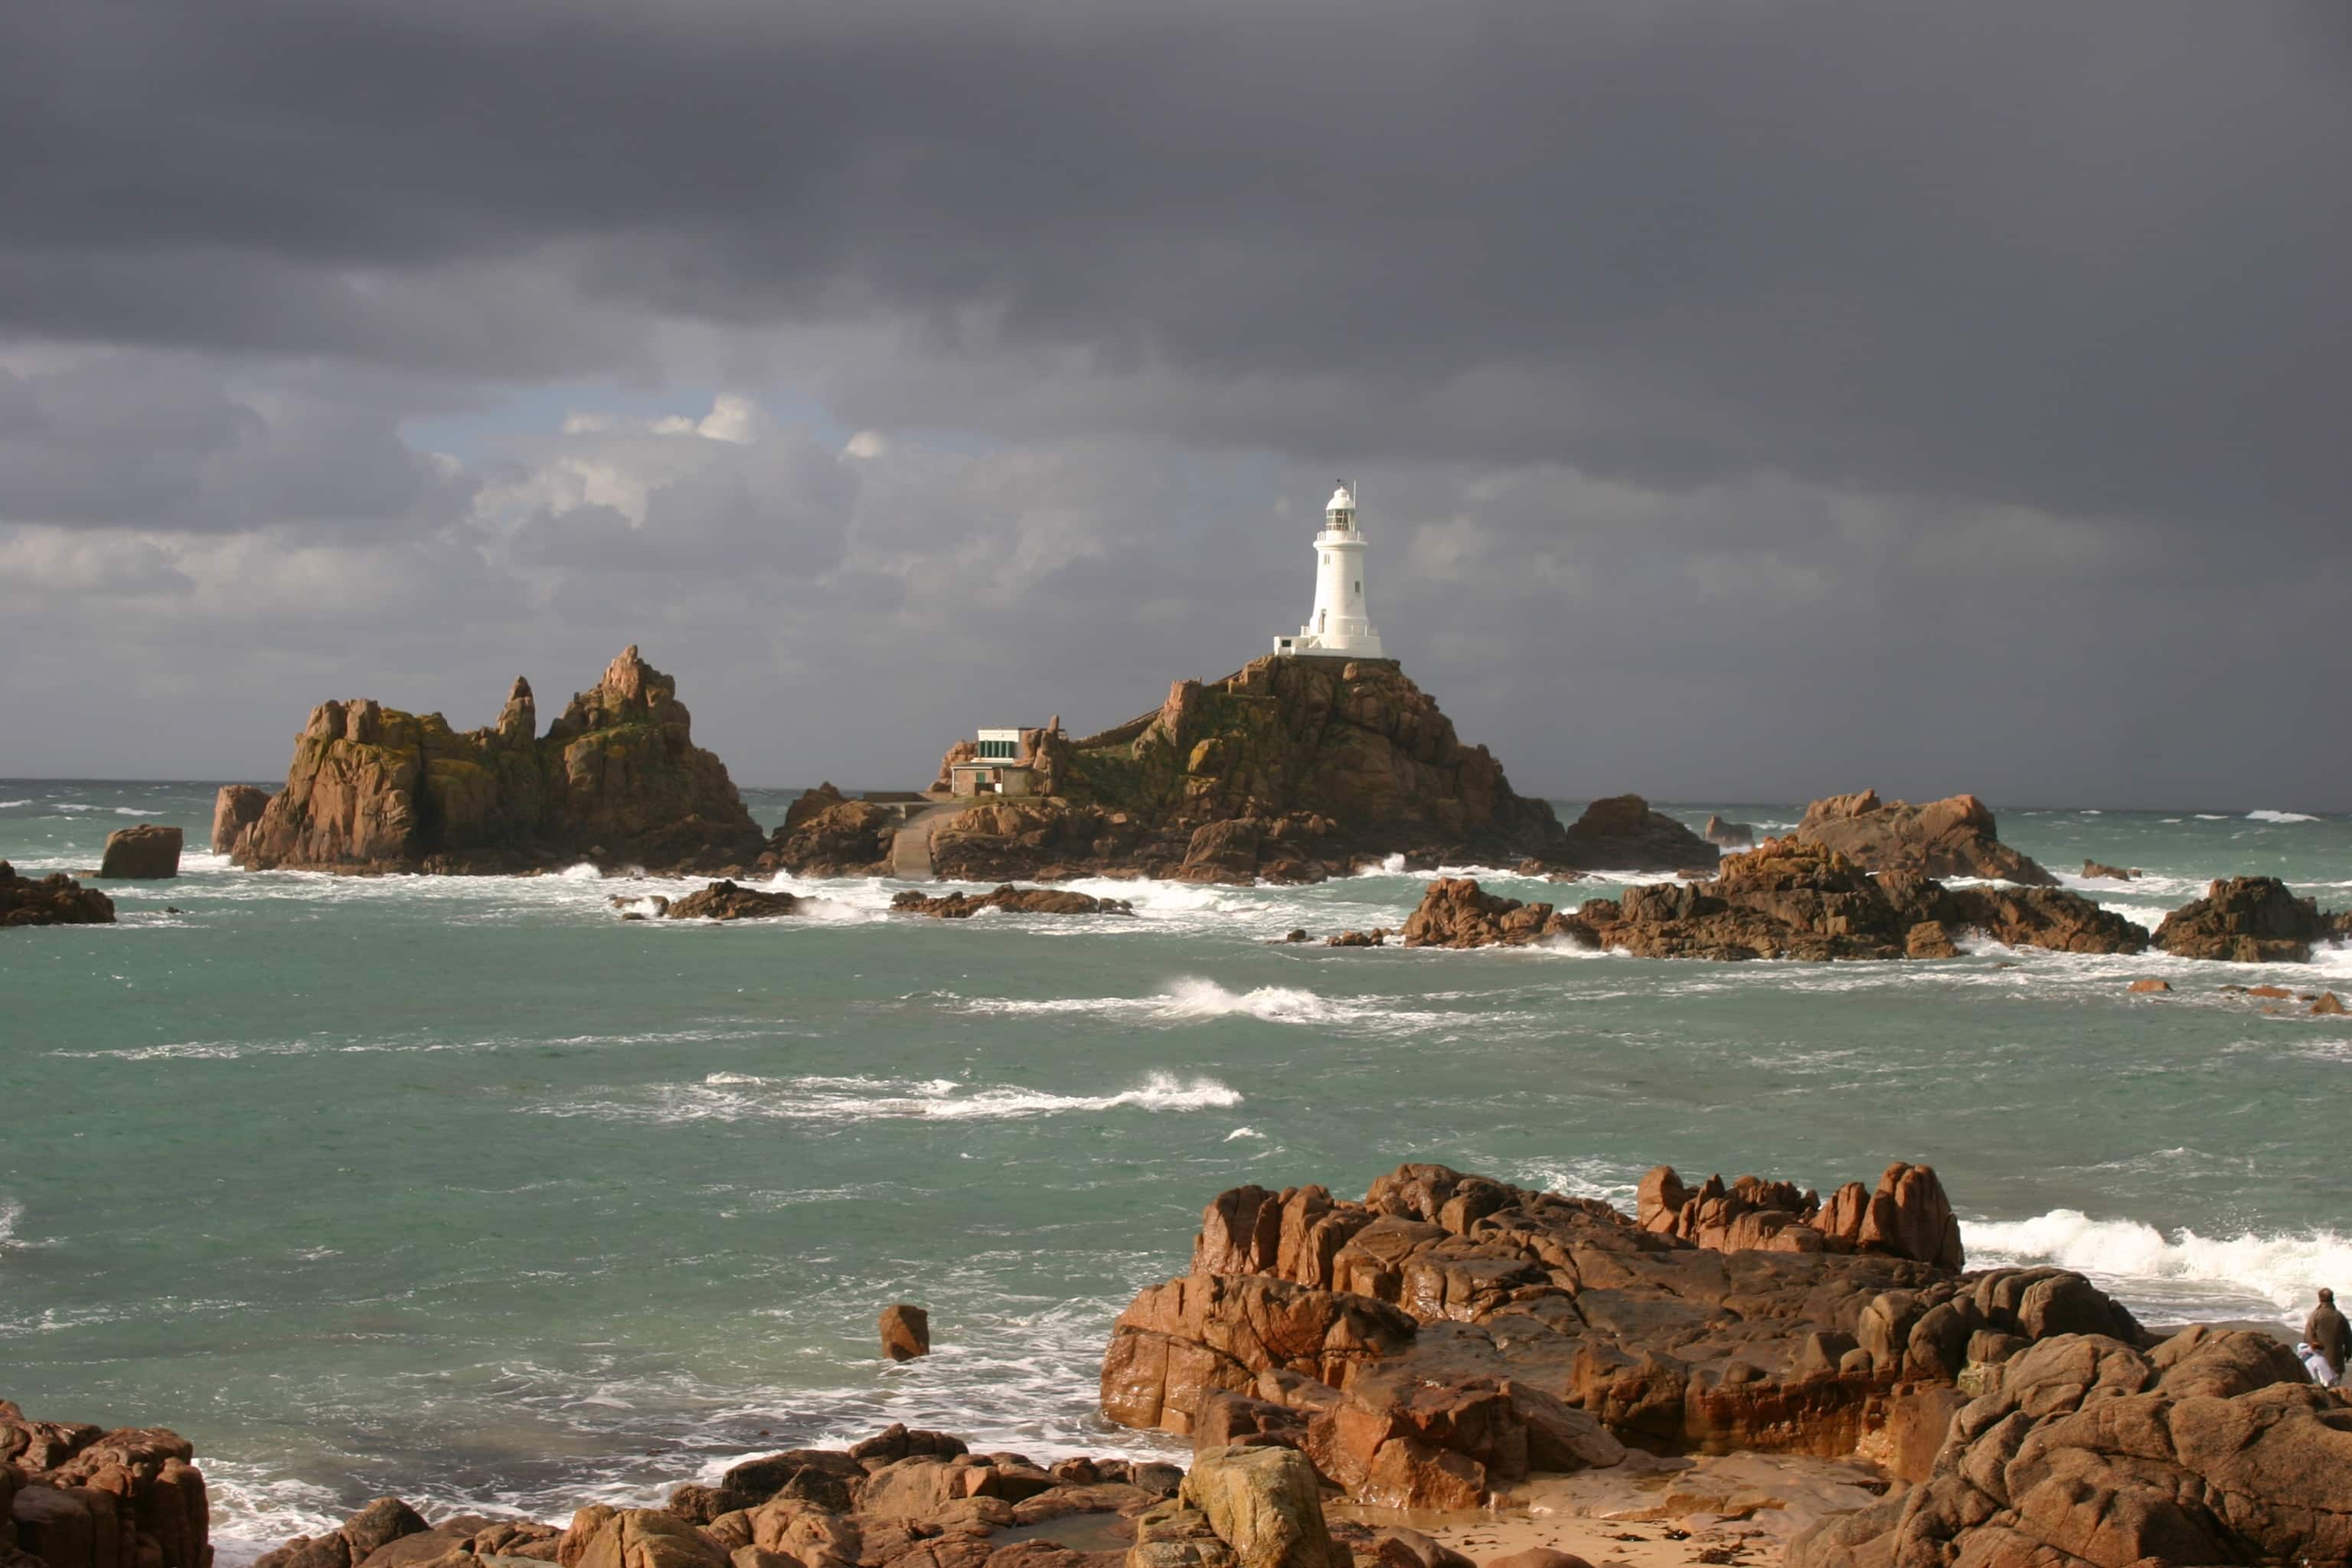 La Corbière Lighthouse, situated on a tidal rock outside Jersey, England